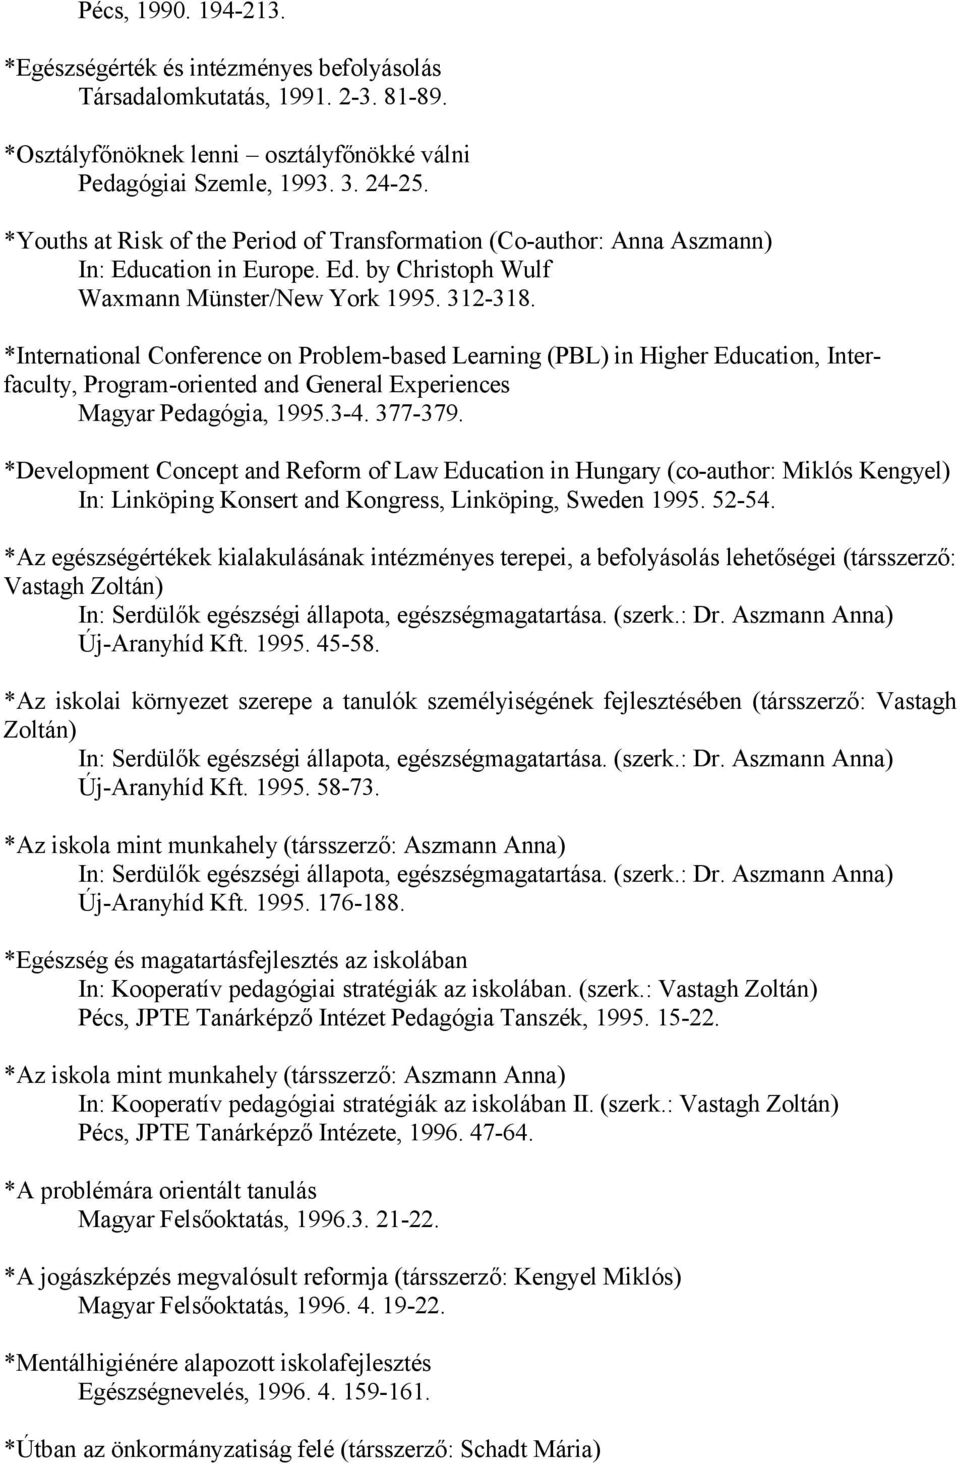 *International Conference on Problem-based Learning (PBL) in Higher Education, Interfaculty, Program-oriented and General Experiences Magyar Pedagógia, 1995.3-4. 377-379.